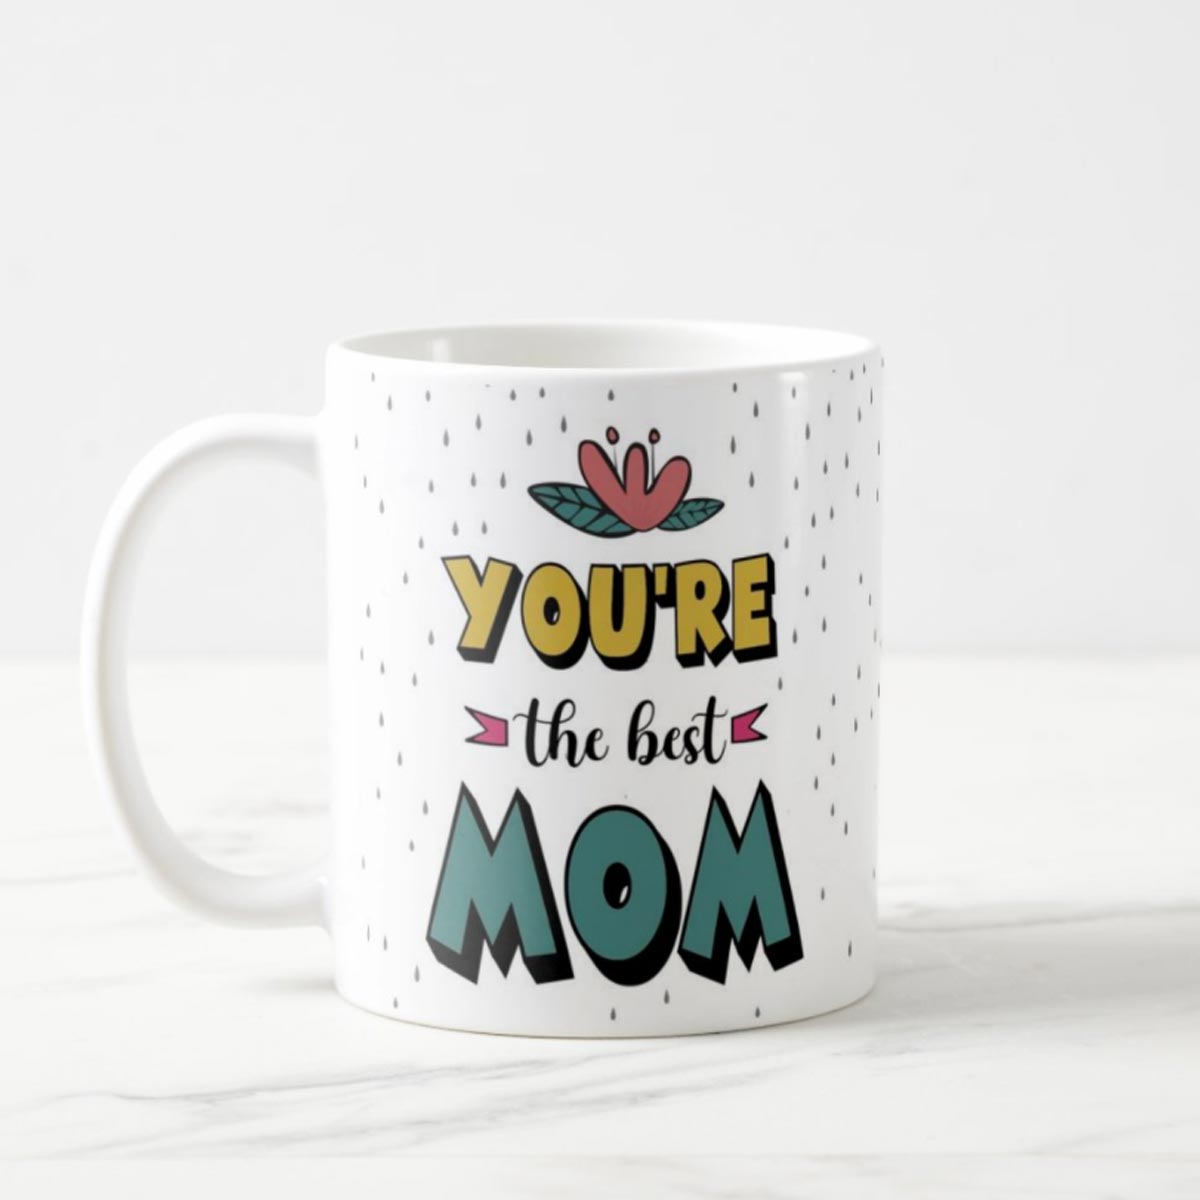 You are the Best Mom Mug-1